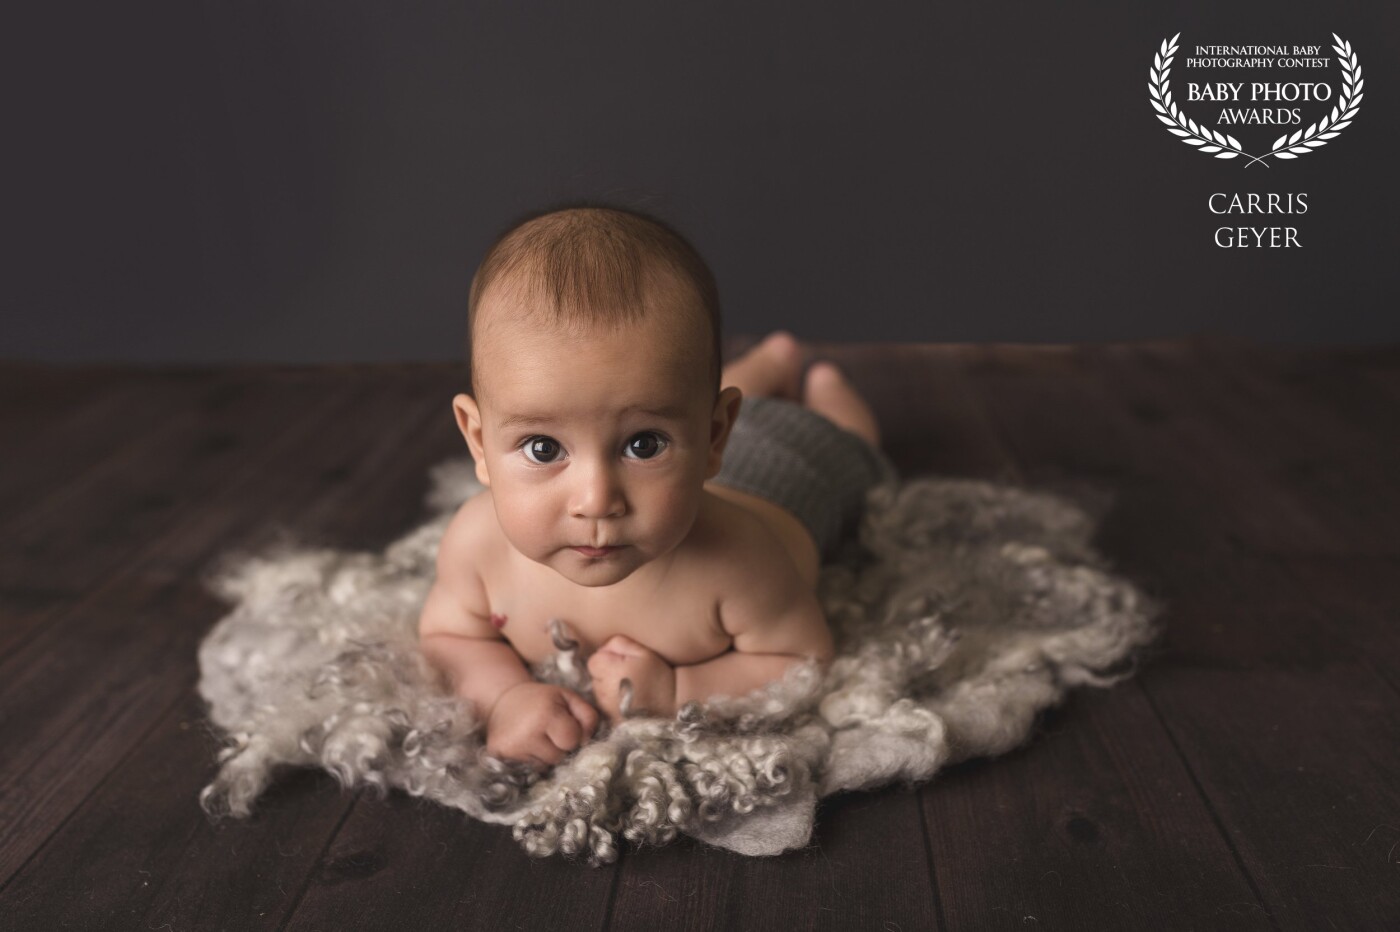 I photographed this absolutely adorable little boy for one of his milestone sessions. This was his second session at just 4 months old and he absolutely loved staring at me and my camera, we got plenty of smiles this day but his gorgeous peaceful face was too cute to pass up and this ended up being one of mine and his mum's favorite photos of the day.